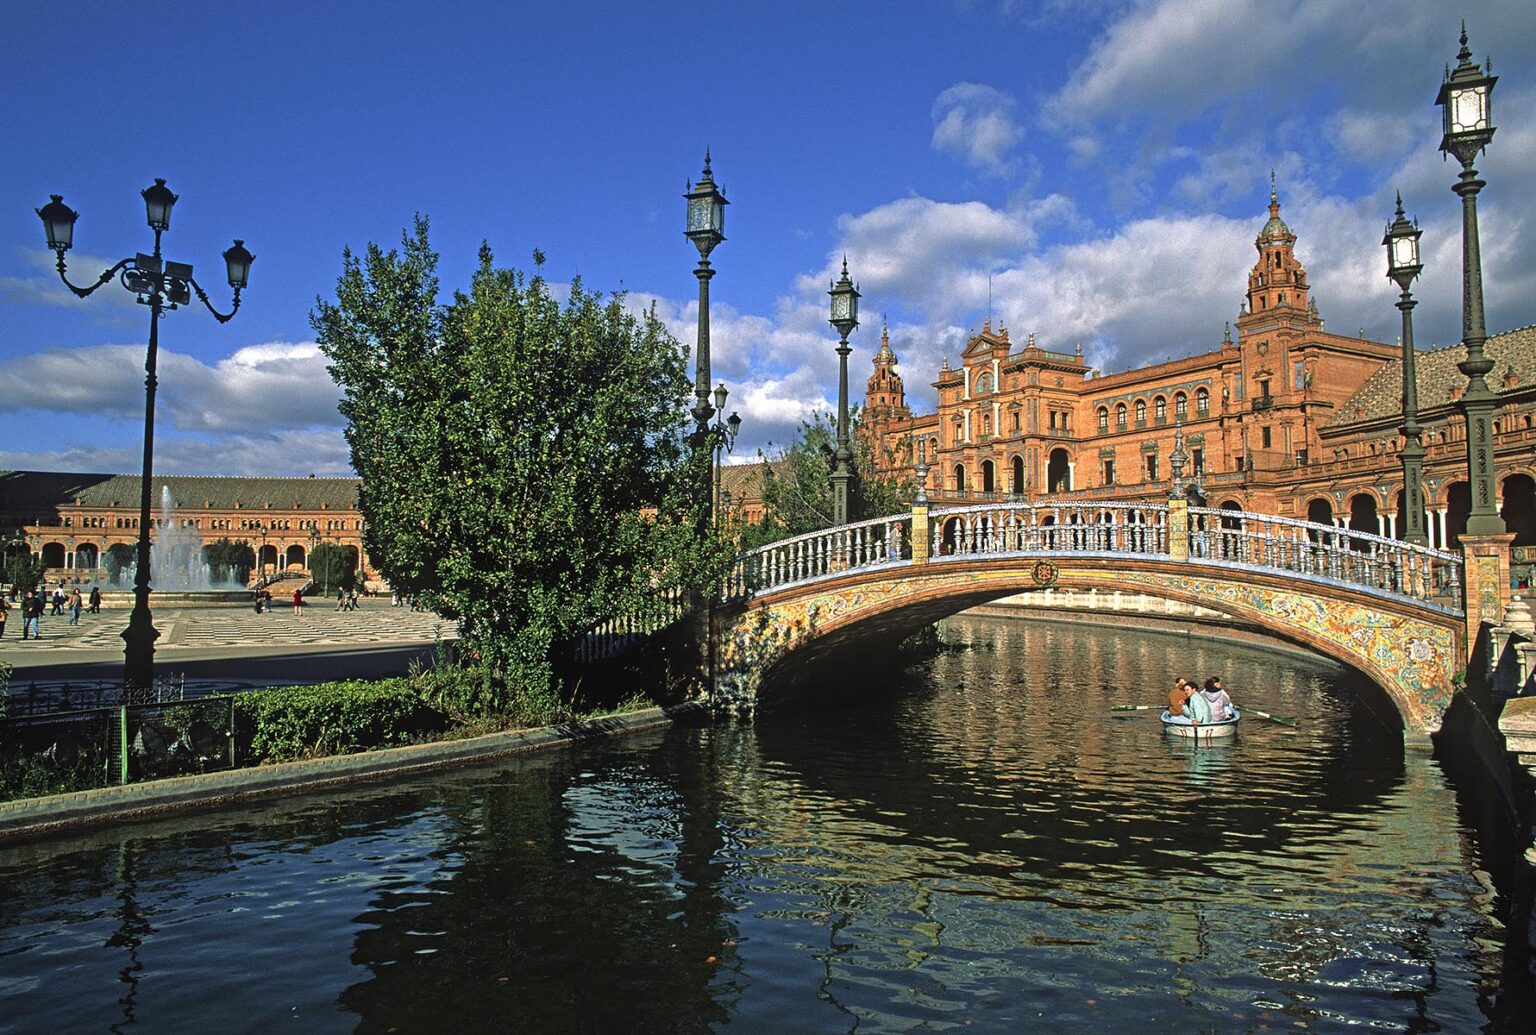 The CANAL of the PLAZA DE ESPANA which was built for the 1929 WORLD FAIR - SEVILLA, SPAIN